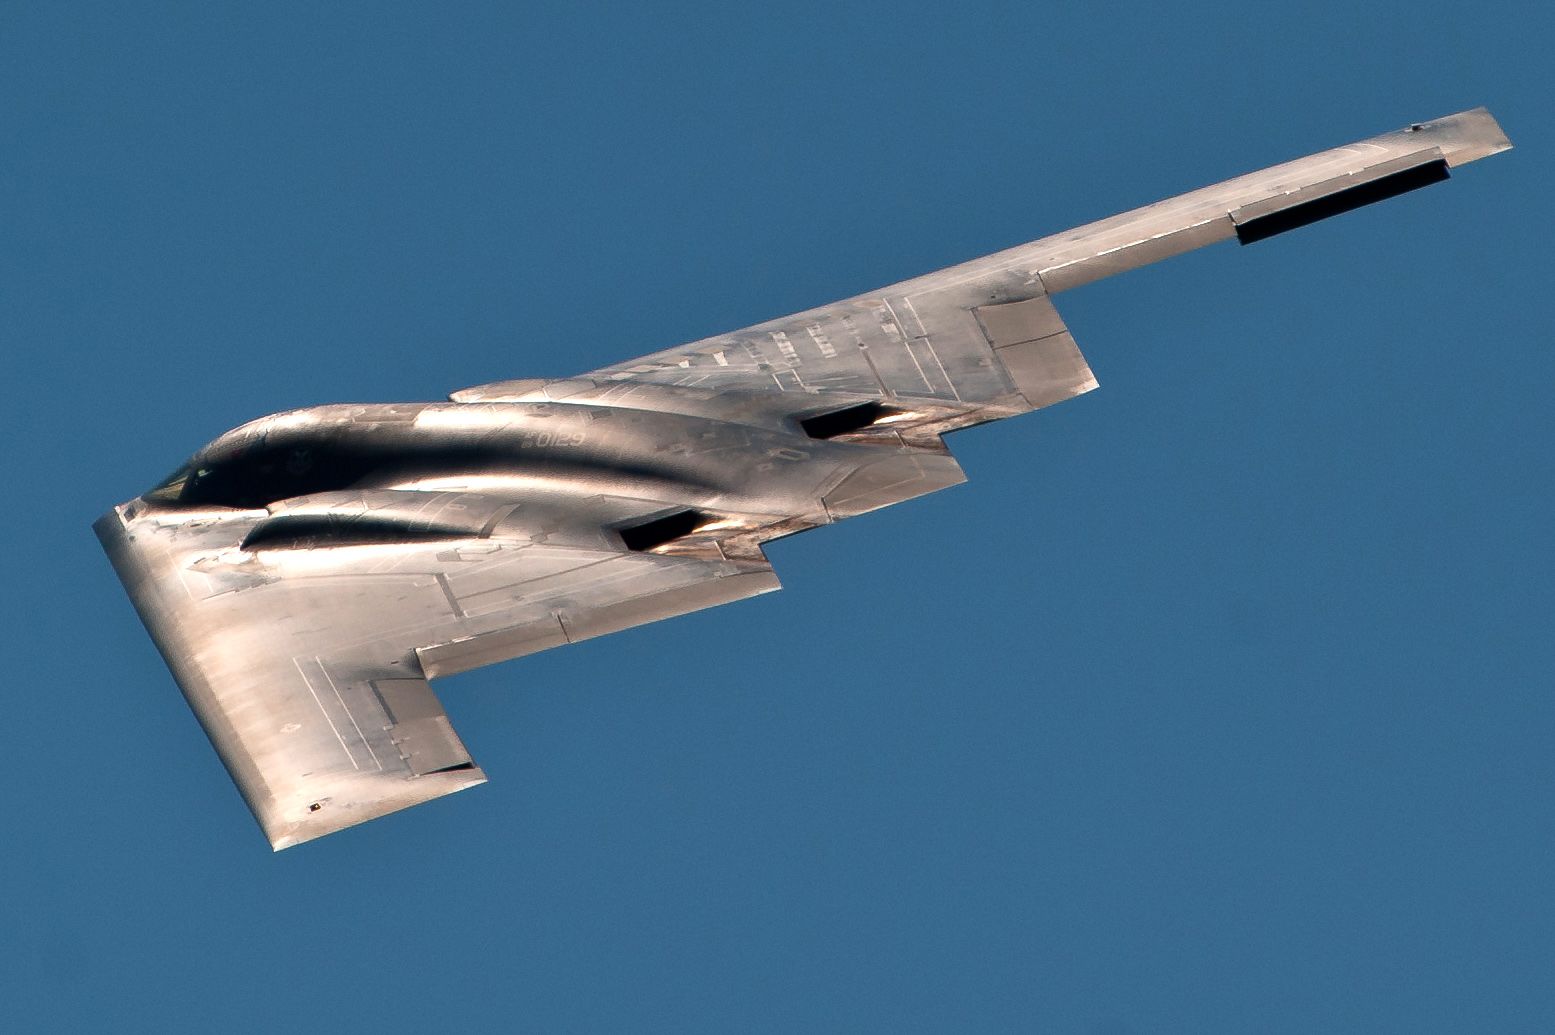 An Inside Look at the US Stealth Bomber That's Still A Mystery 30